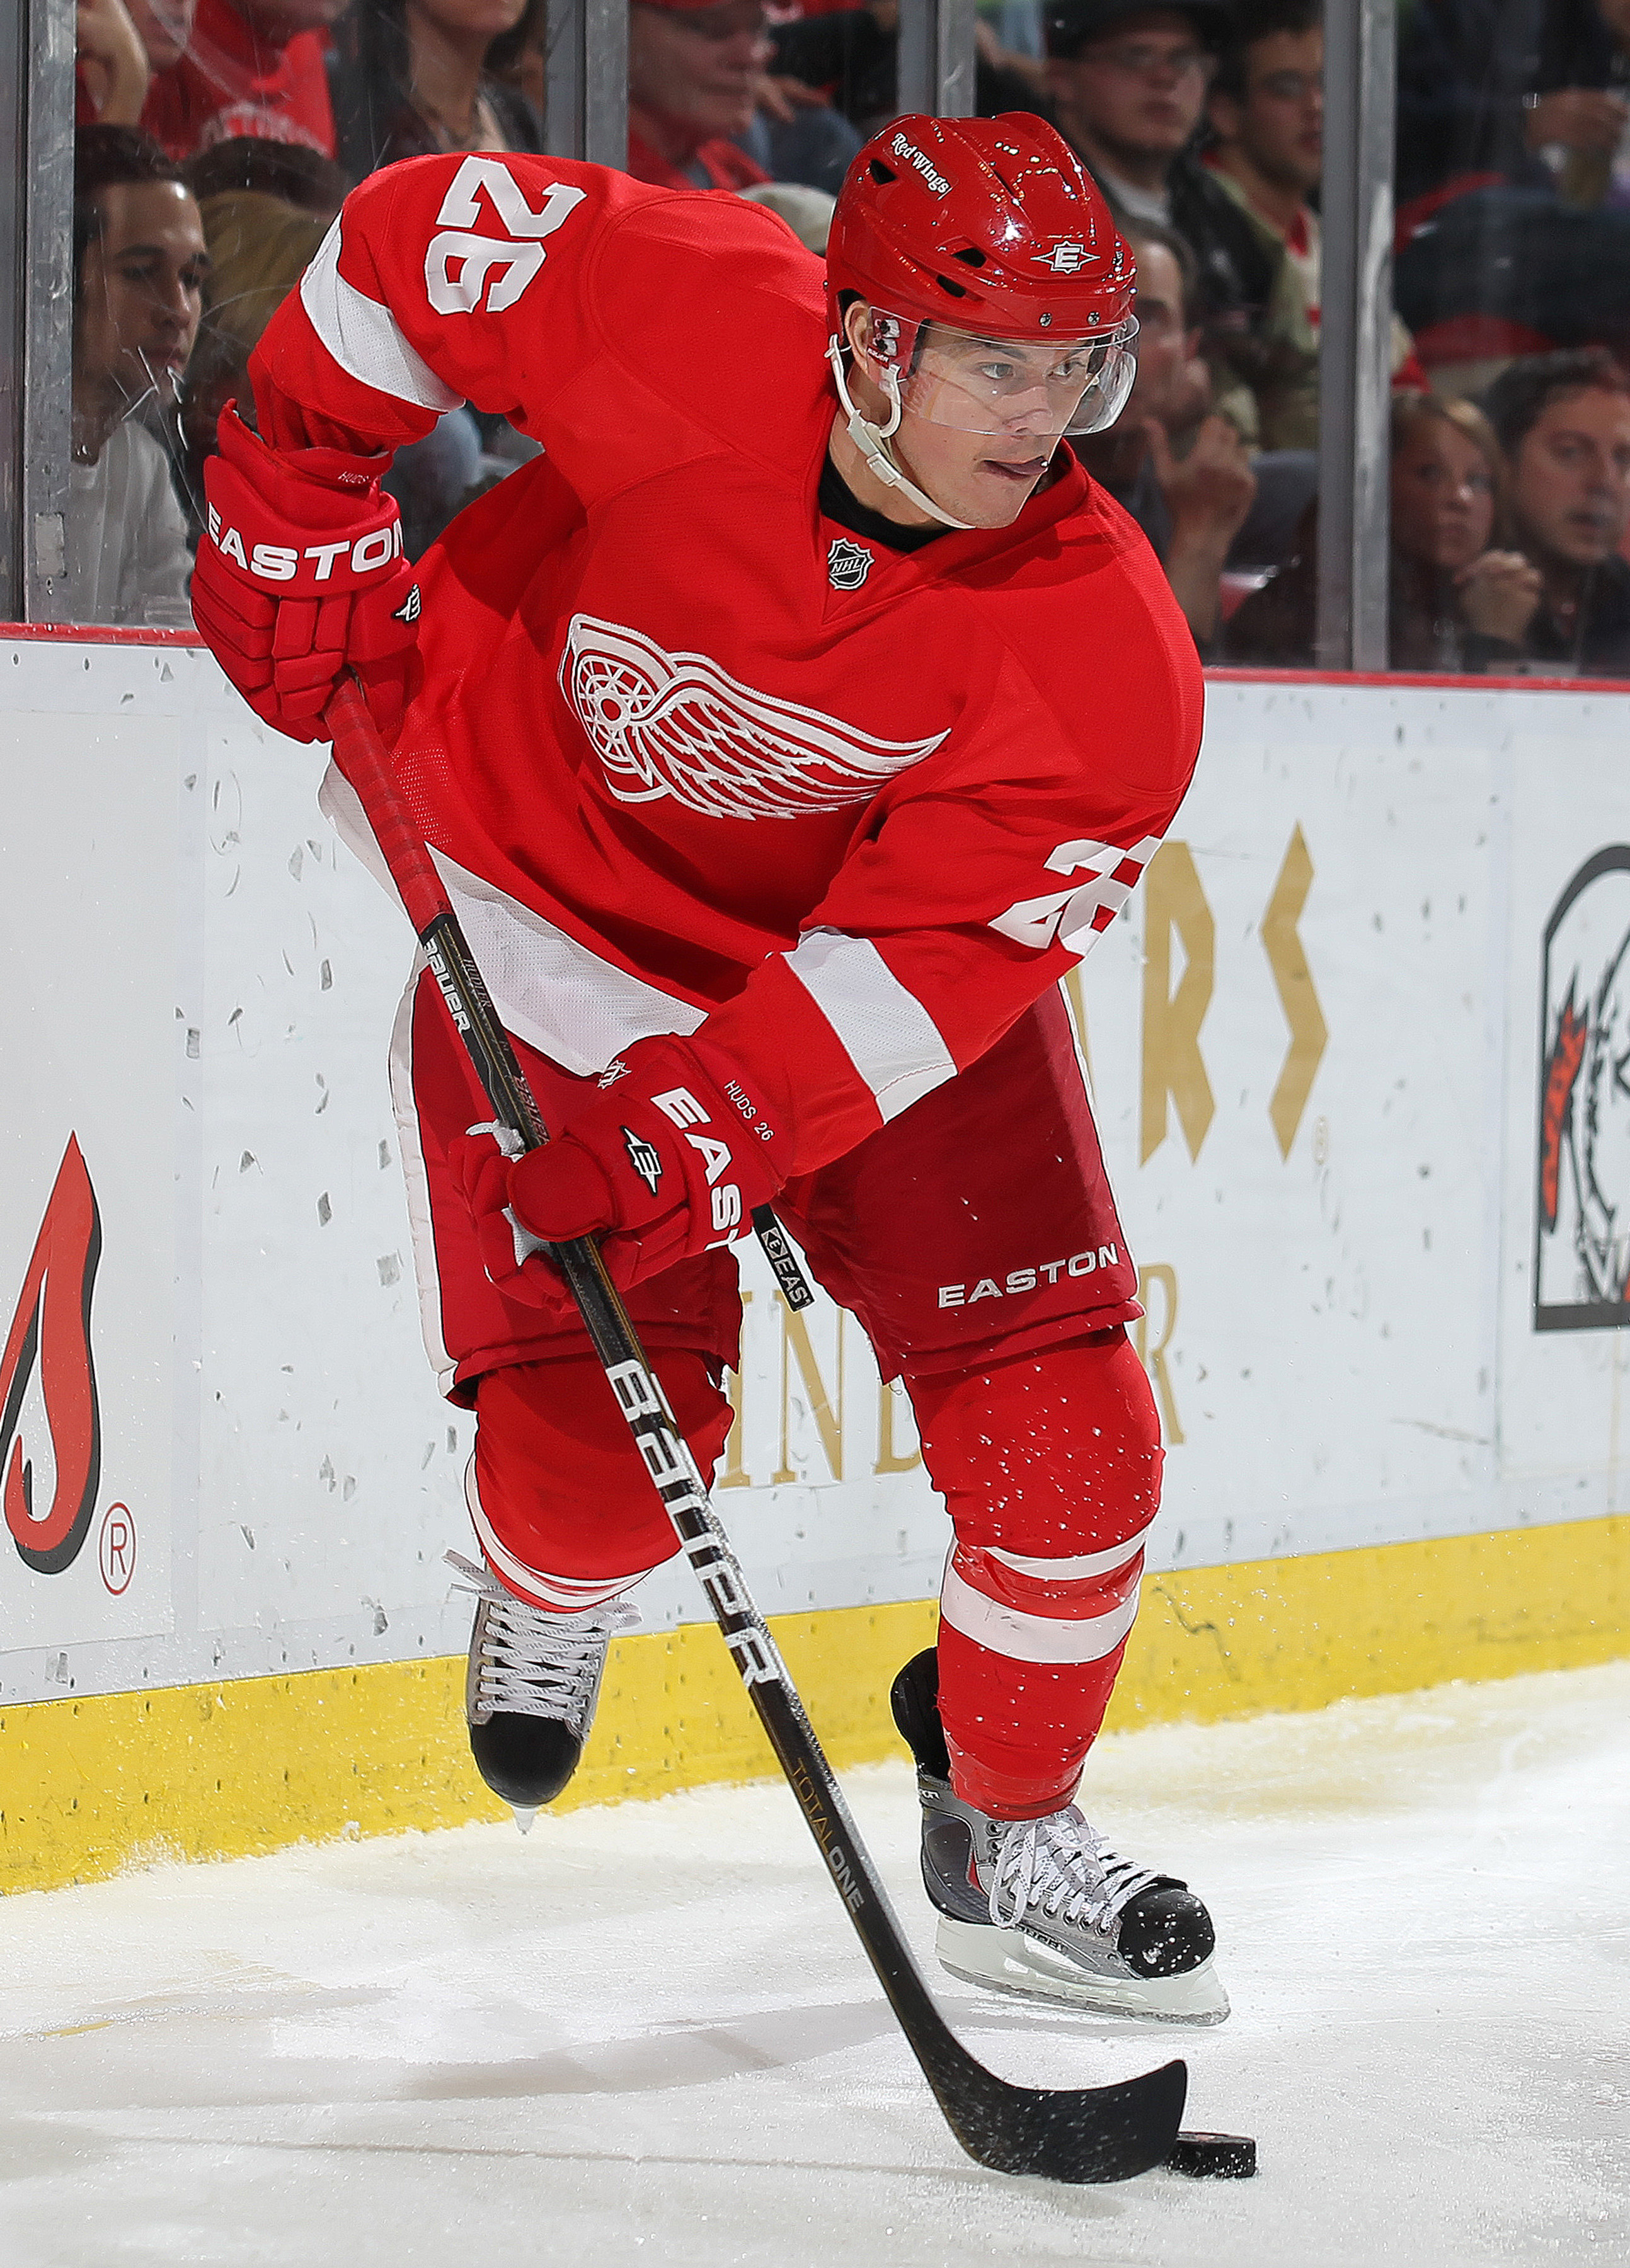 DETROIT,MI - DECEMBER 10:  Jiri Hudler #26 of the Detroit Red Wings skates with the puck during the game against the Montreal Canadiens at the Joe Louis Arena on December 10, 2010  in Detroit, Michigan. The Wings defeated the Canadiens 4-2. (Photo by Clau